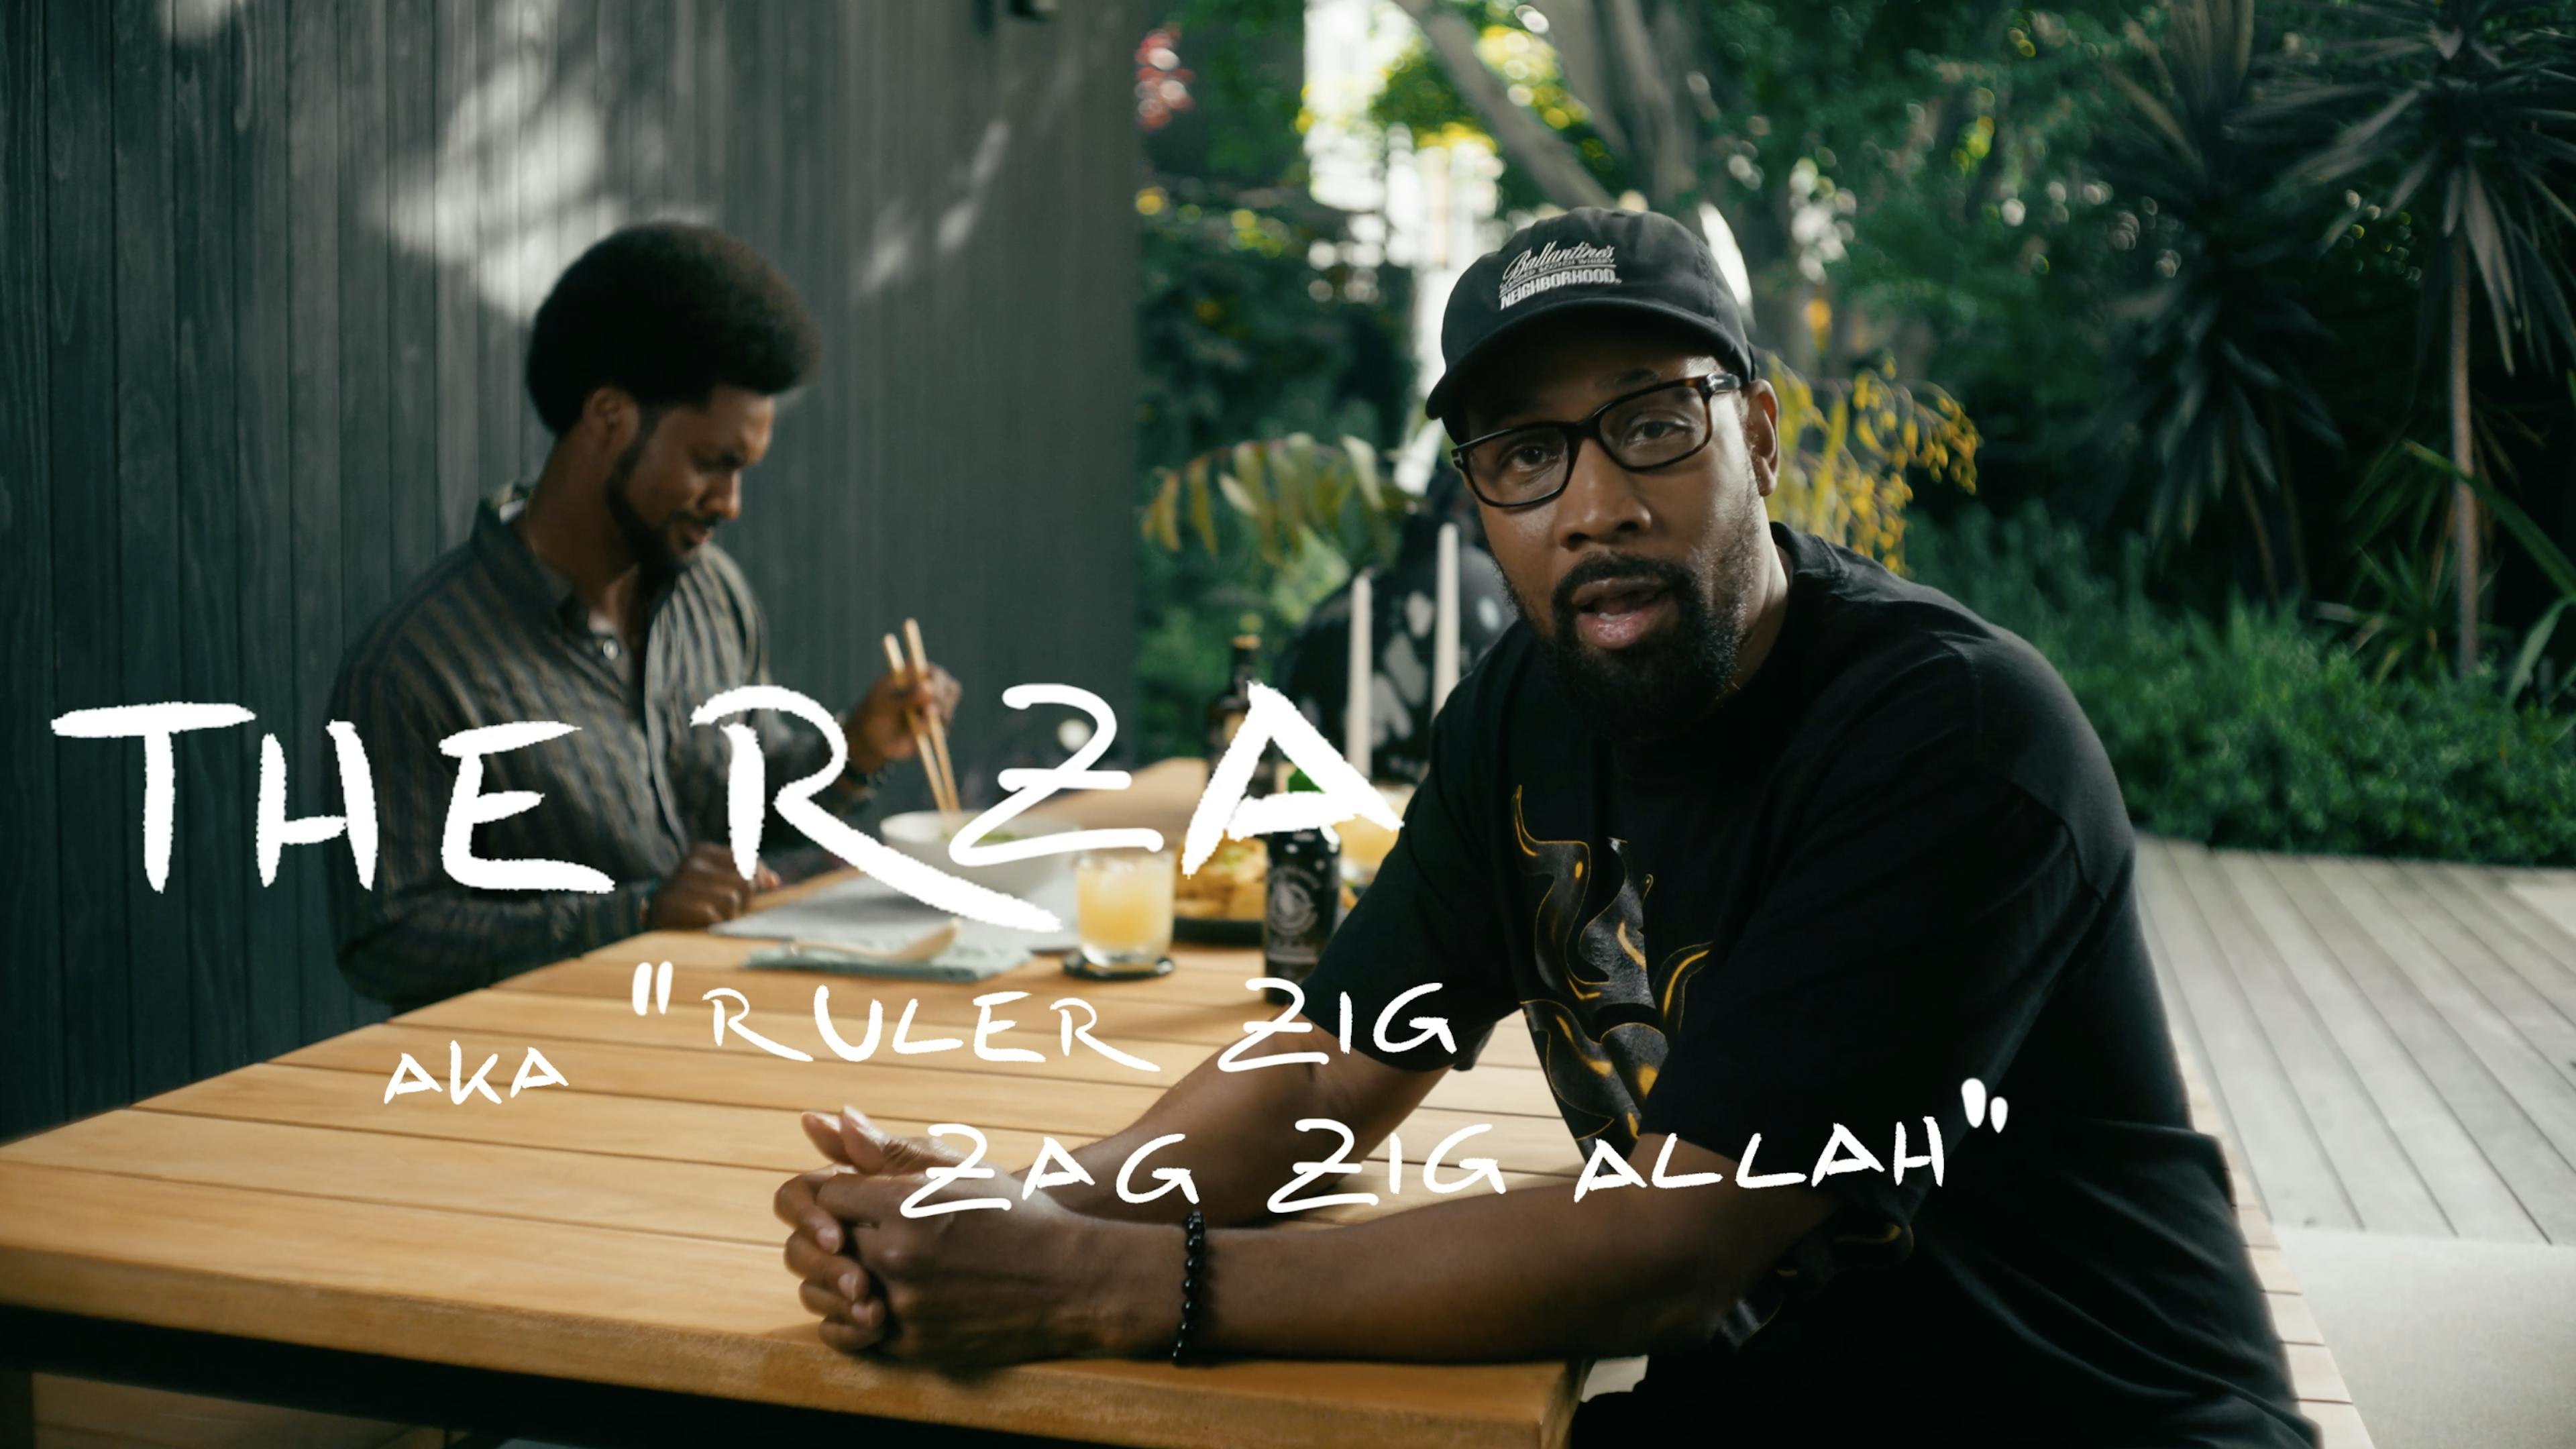 A man (RZA) looks into the camera with the text "The RZA A.K.A "Ruler Zig Zag Zig Allah"